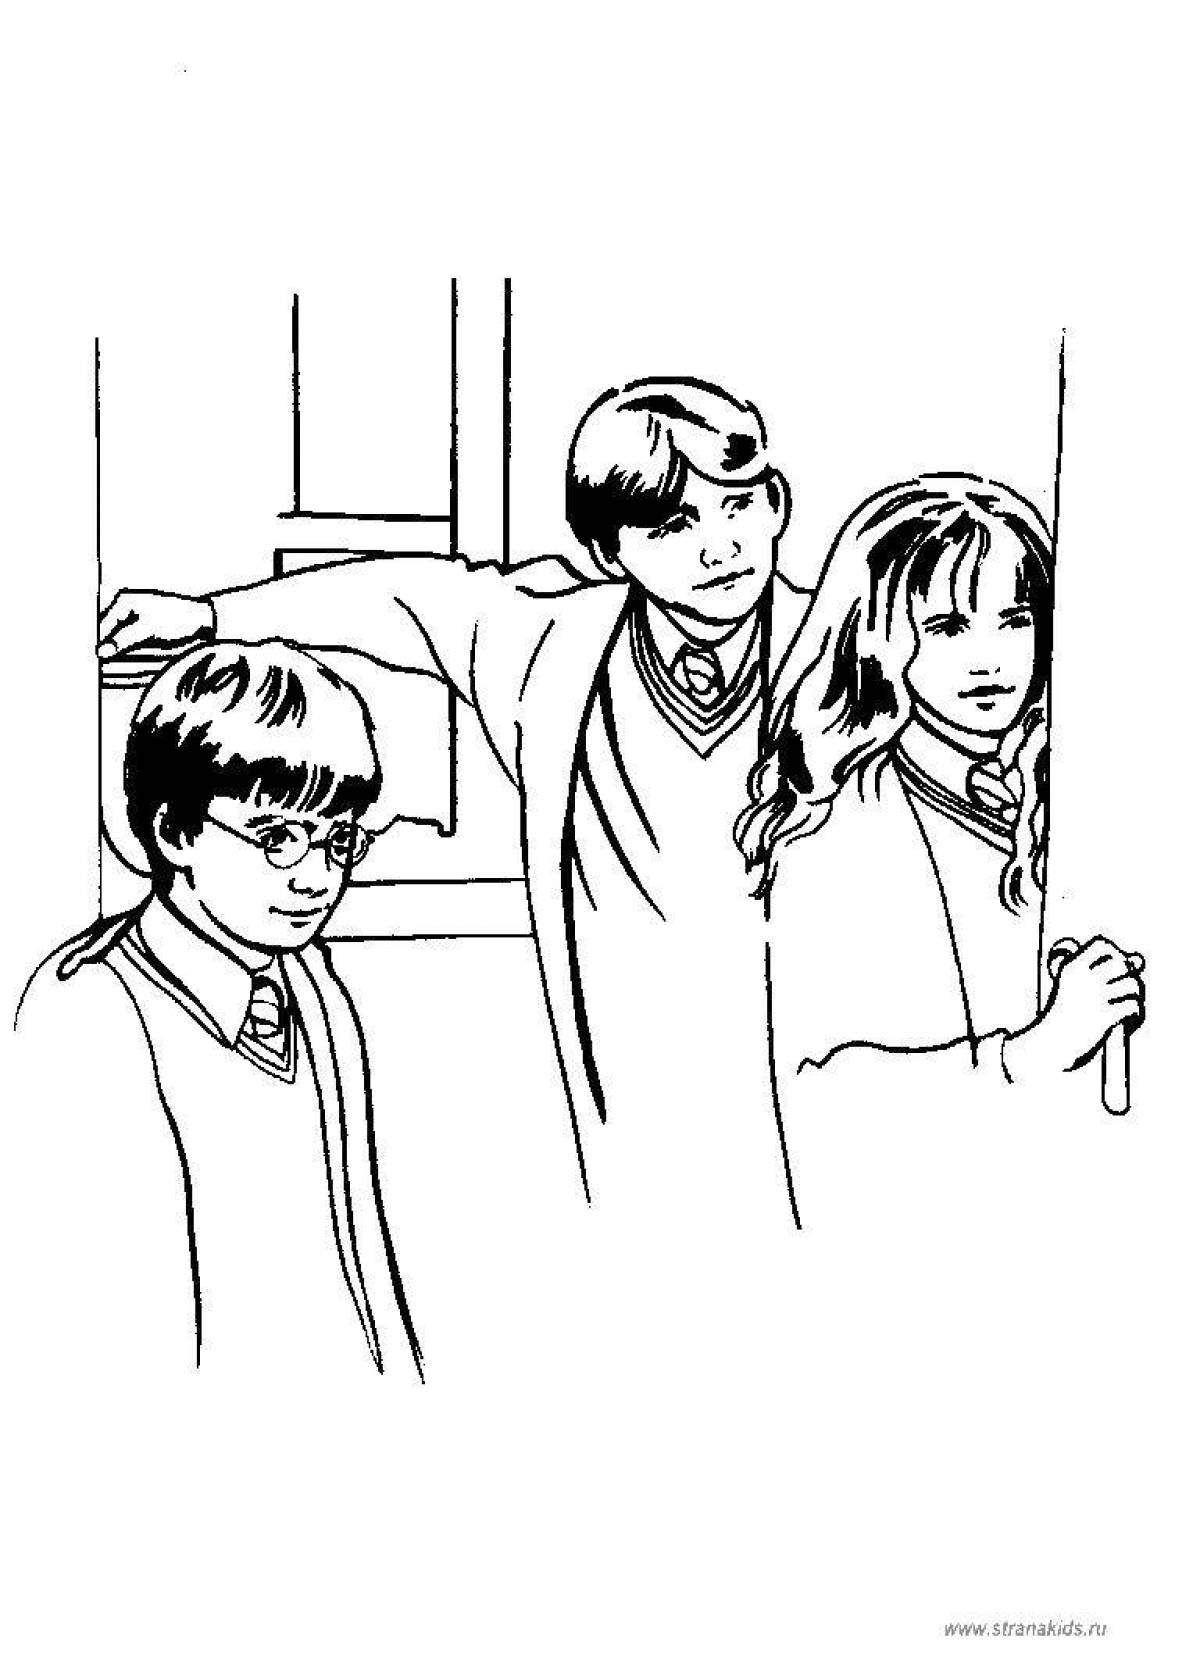 Harry potter harry ron and hermione #9